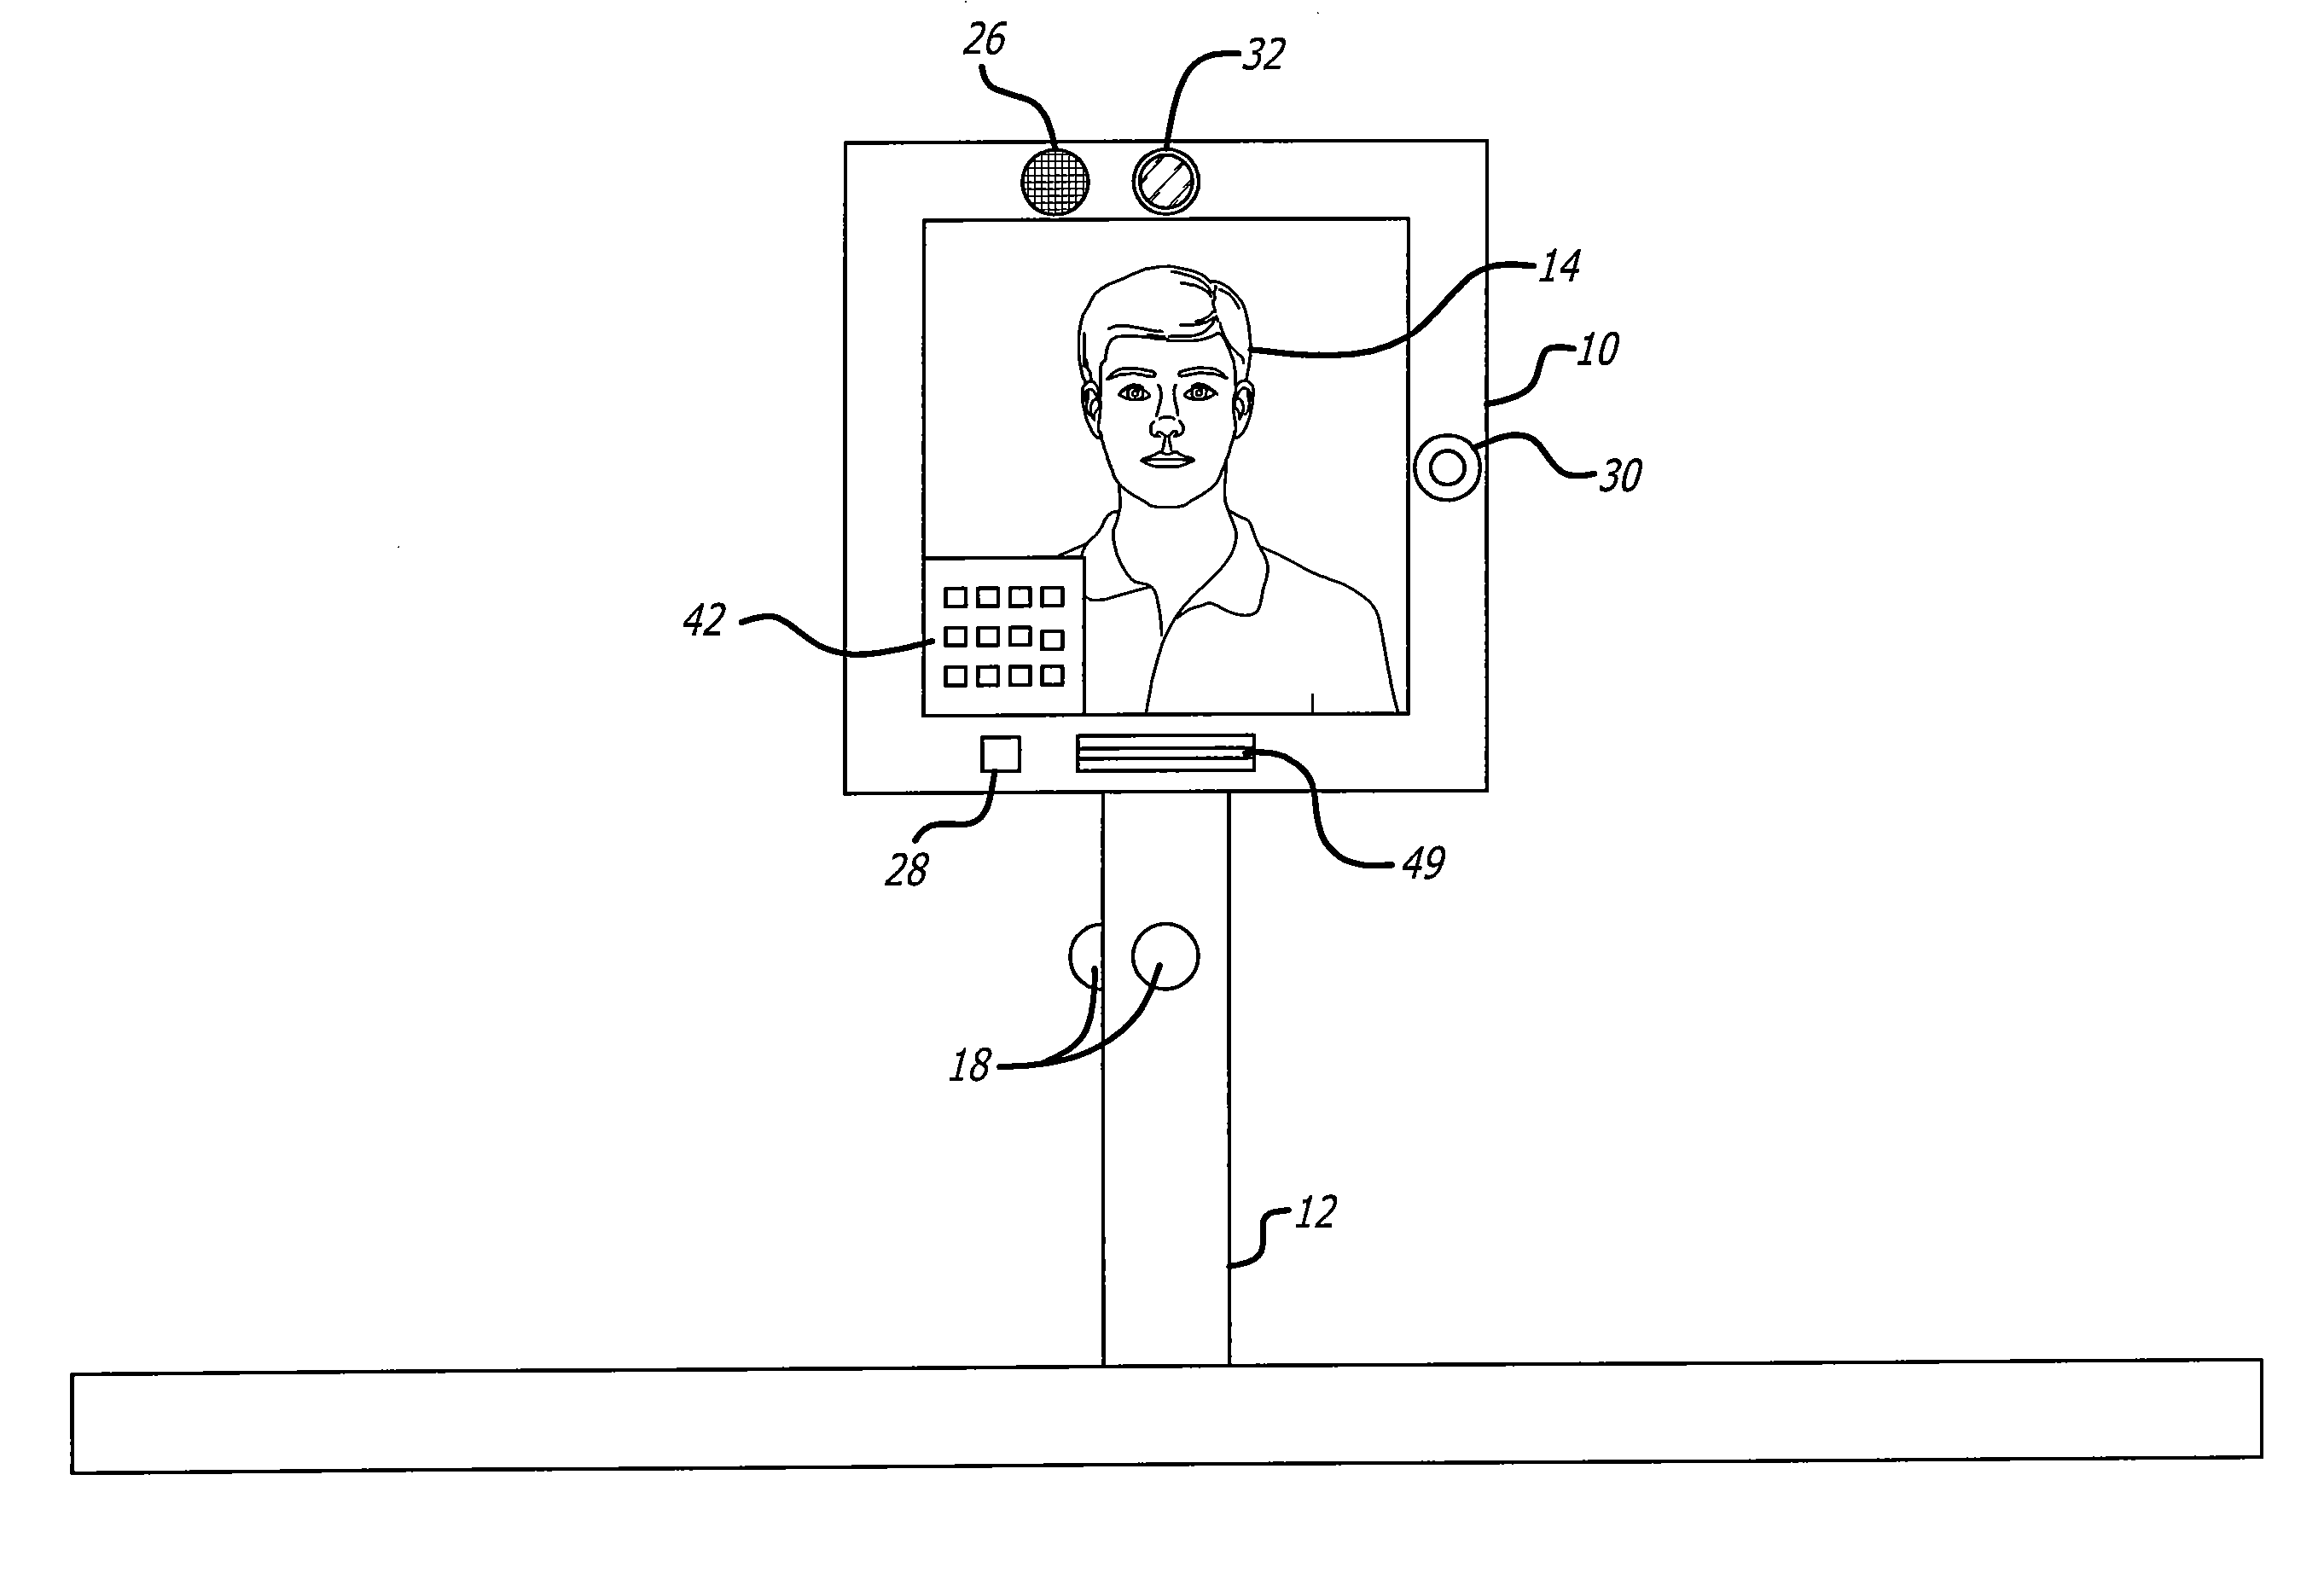 Automated security gate attendant